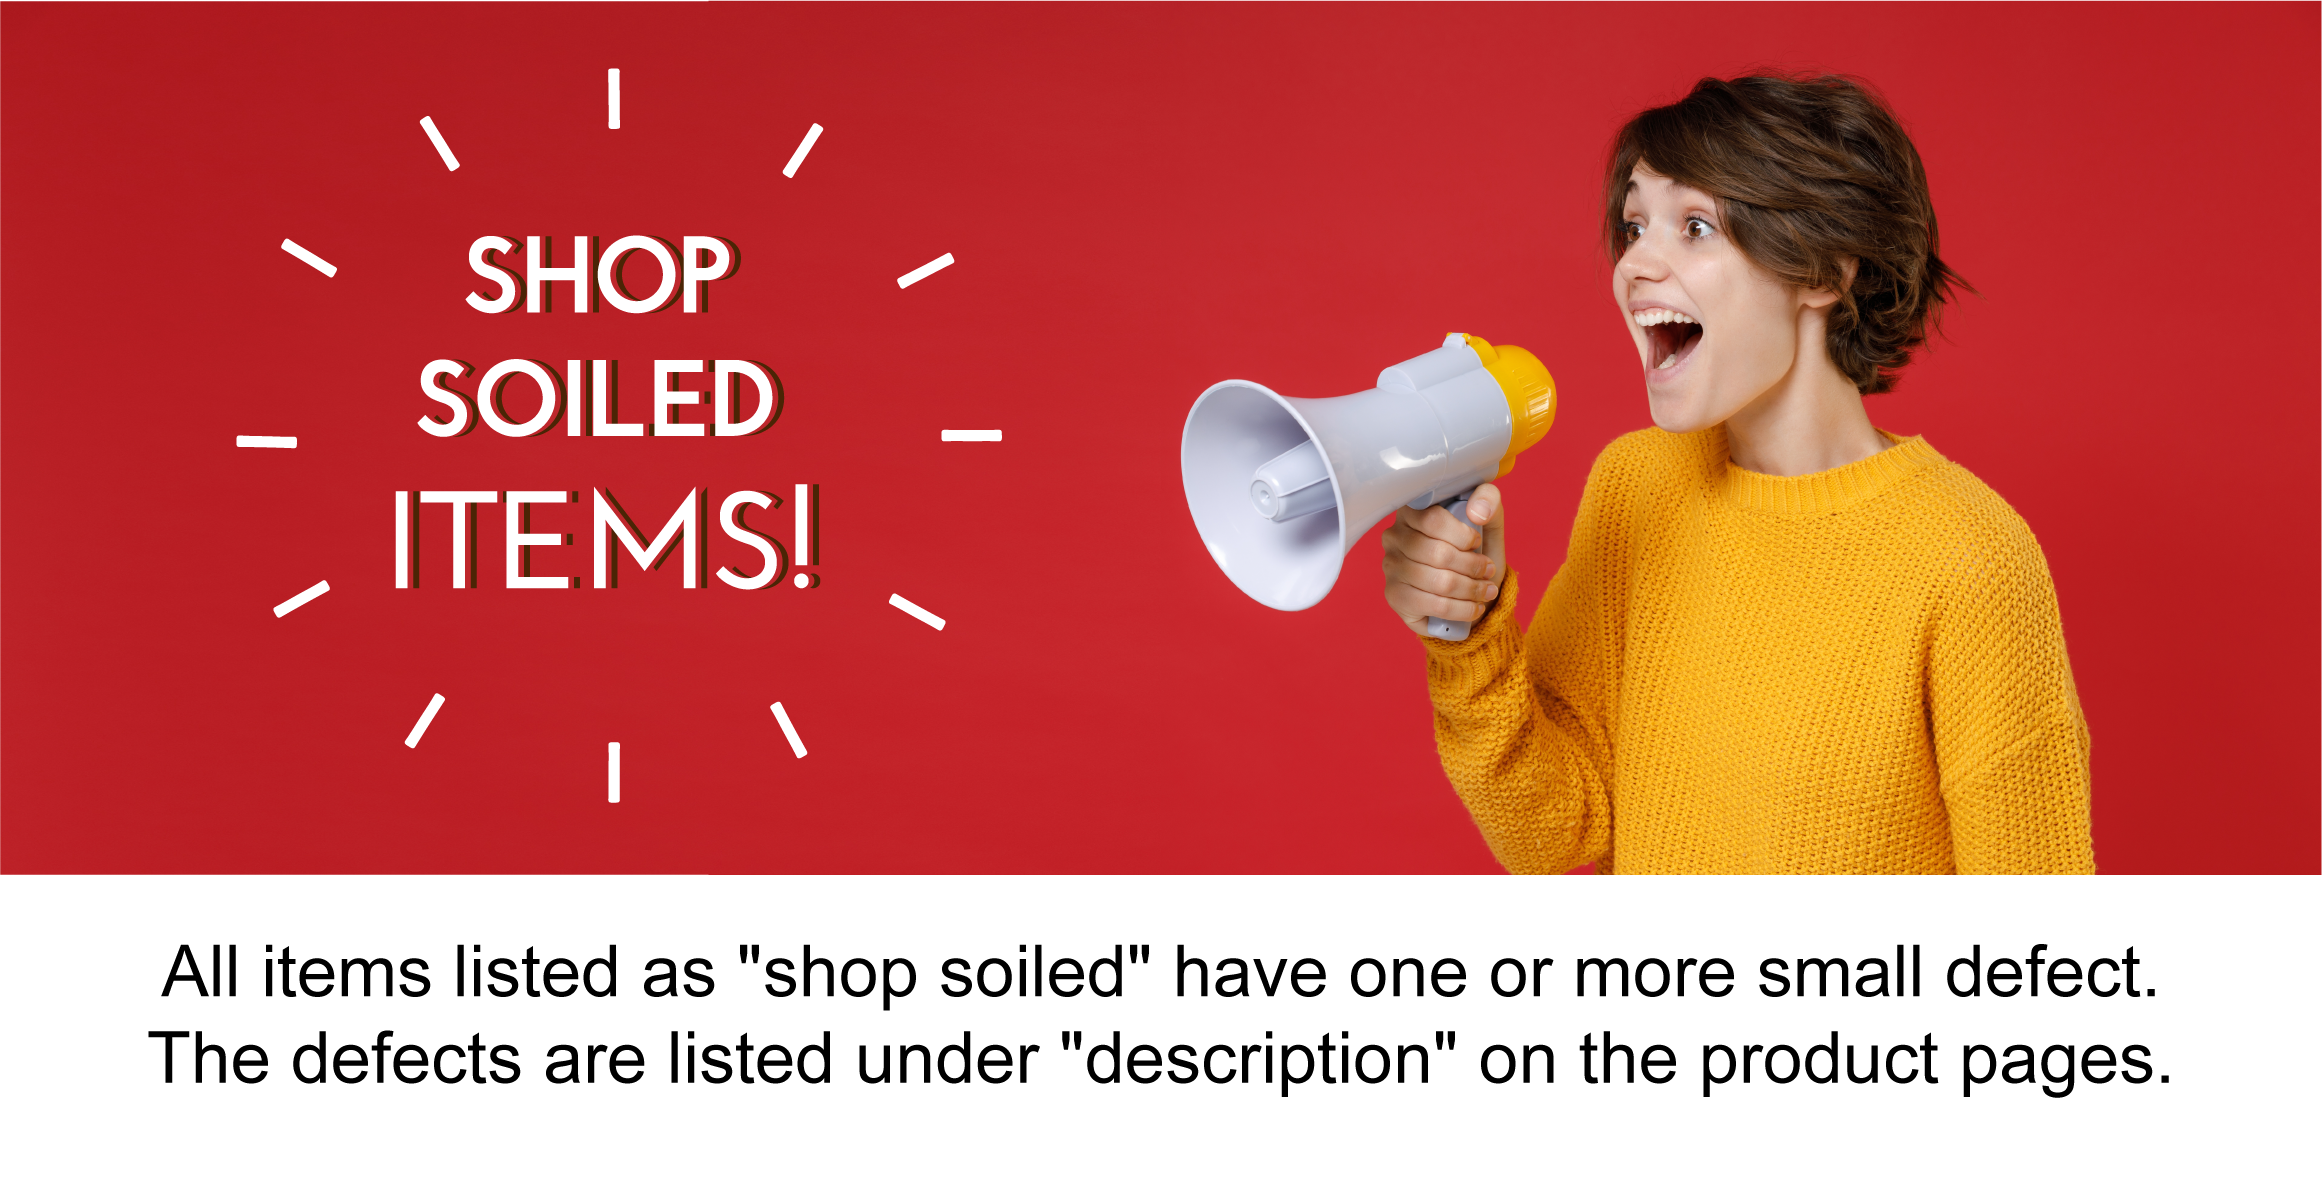 Image shows a boy with a megaphone, shouting 'shop soiled items!'